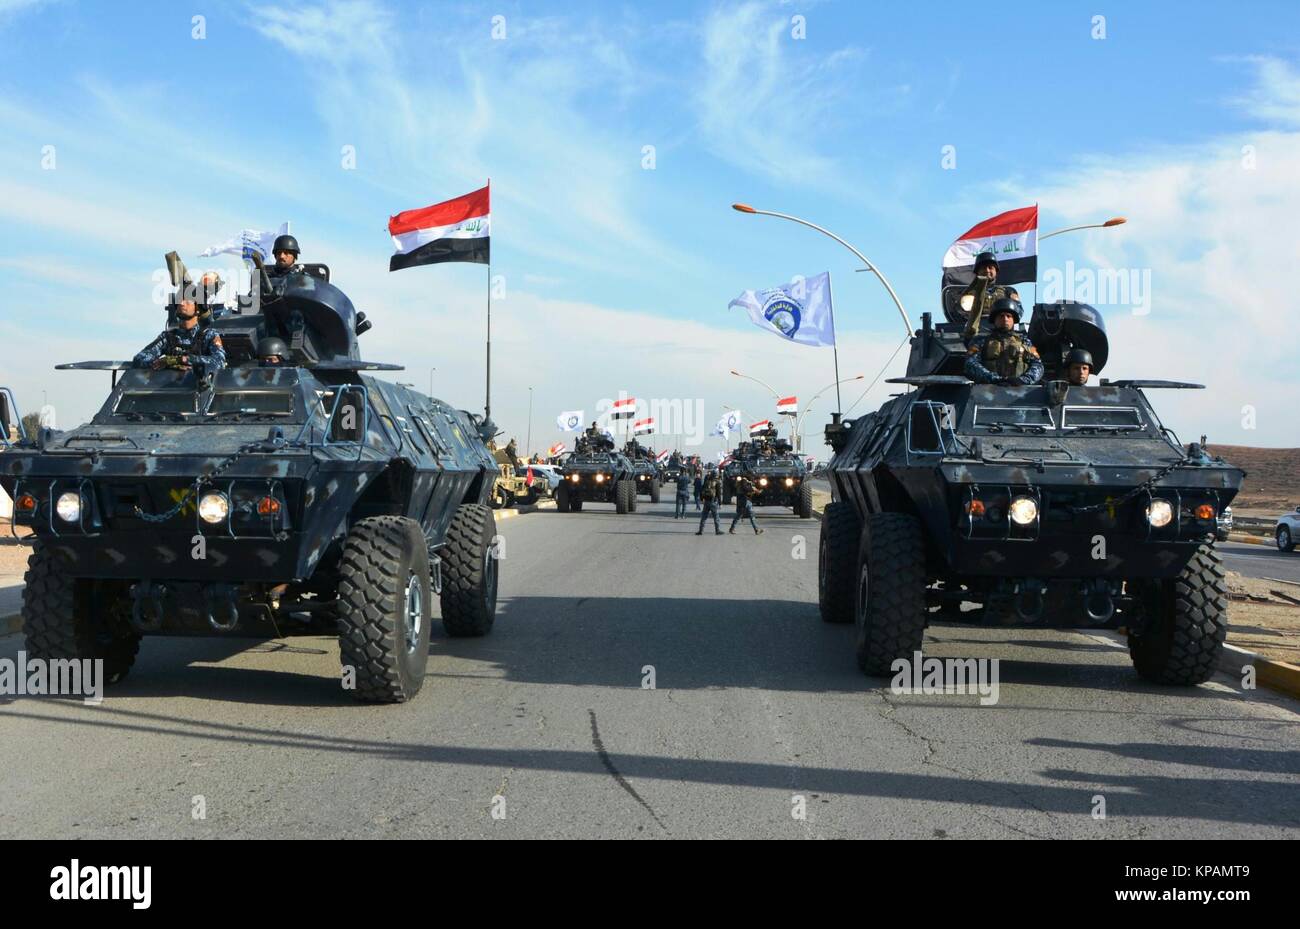 Mosul. 14th Dec, 2017. Iraqi armored vehicles take part in a parade in Mosul, Iraq on Dec. 14, 2017. Ninevah Operation Command of the Iraqi military on Thursday paraded in Mosul to celebrate the full liberation of Iraqi lands of the Islamic State (IS) group. Credit: Khalil Dawood/Xinhua/Alamy Live News Stock Photo